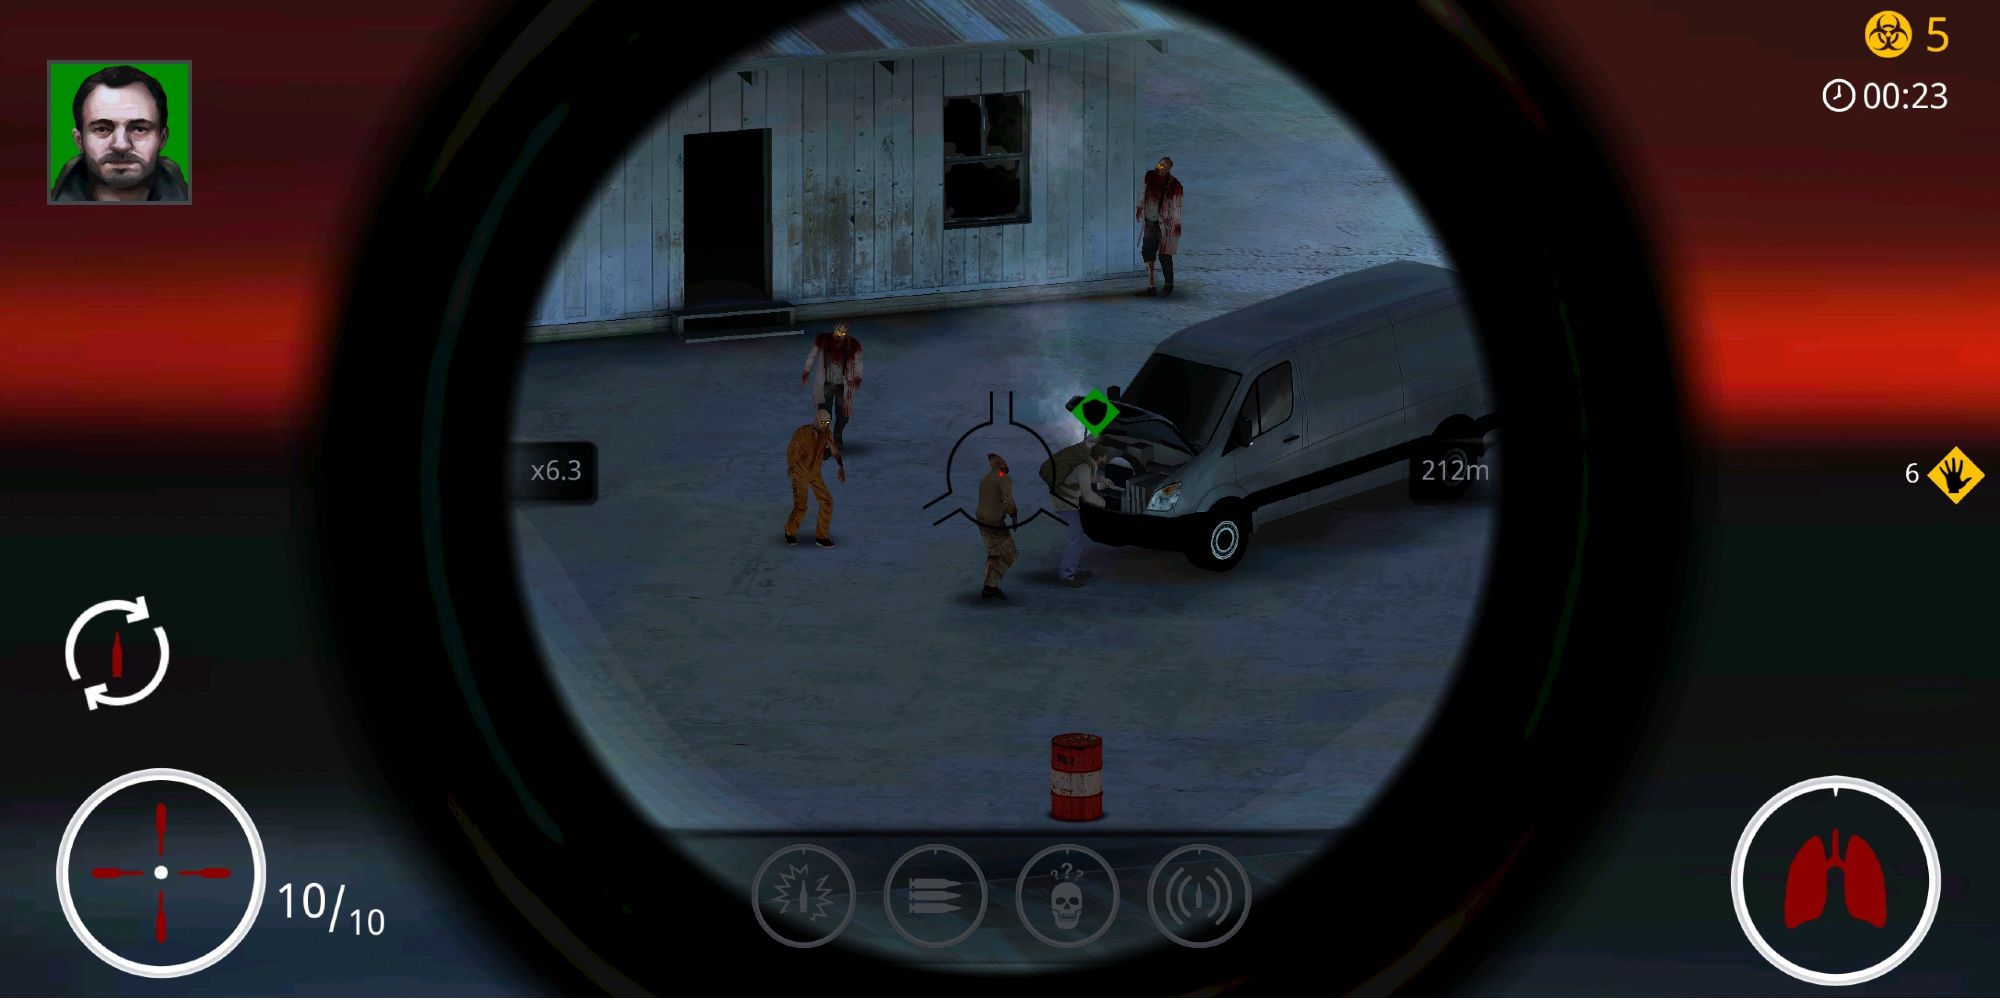 Best FPS Games on Mobile - Hitman - Sniper - Player zooms in on enemy